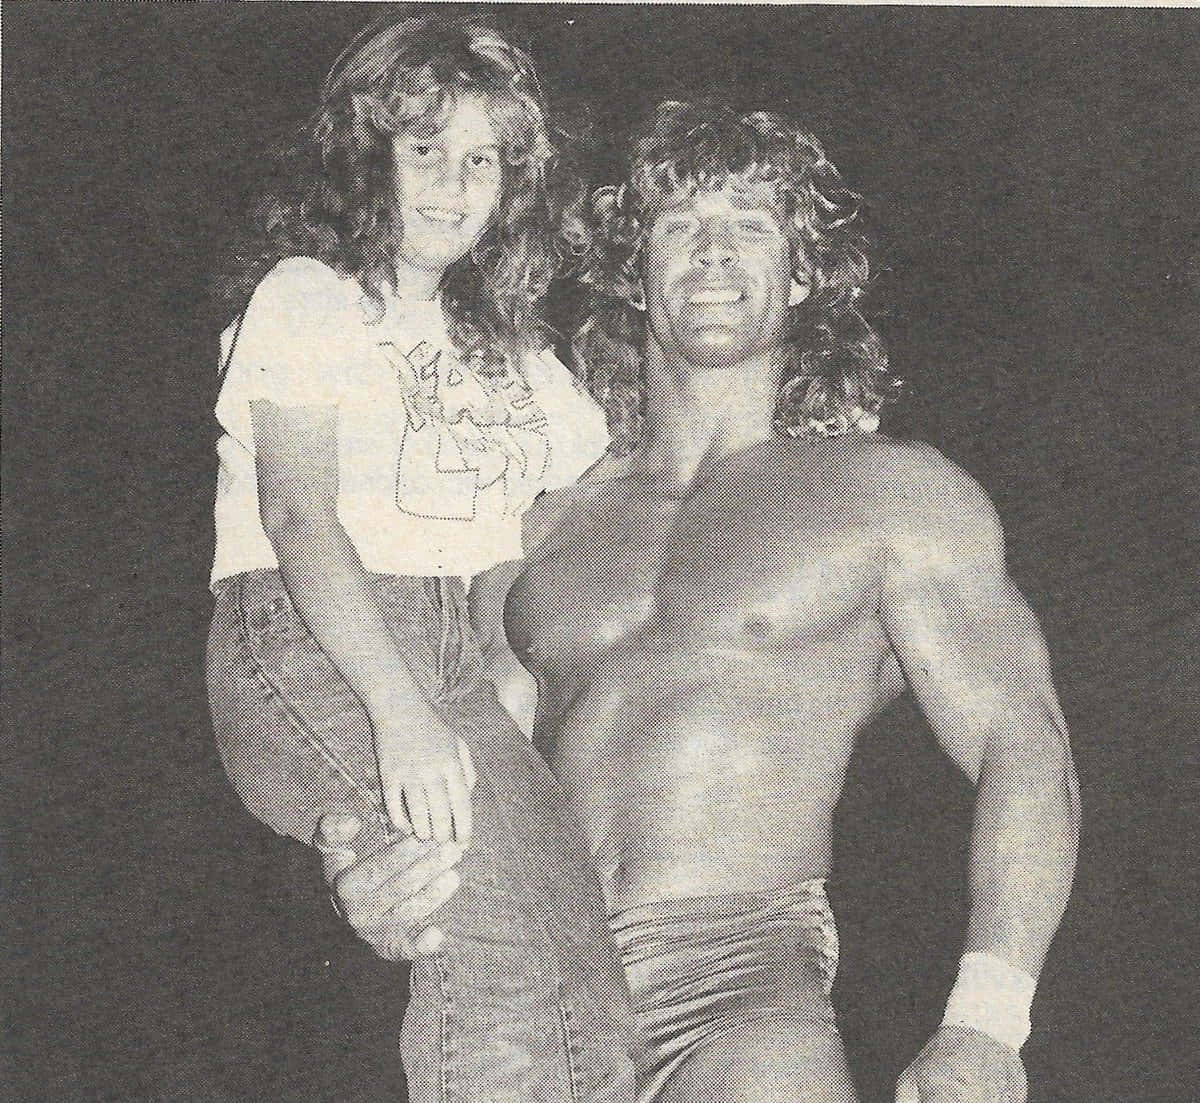 Professional Wrestler Kerry Von Erich with his wife Catherine M. Murray. Wallpaper